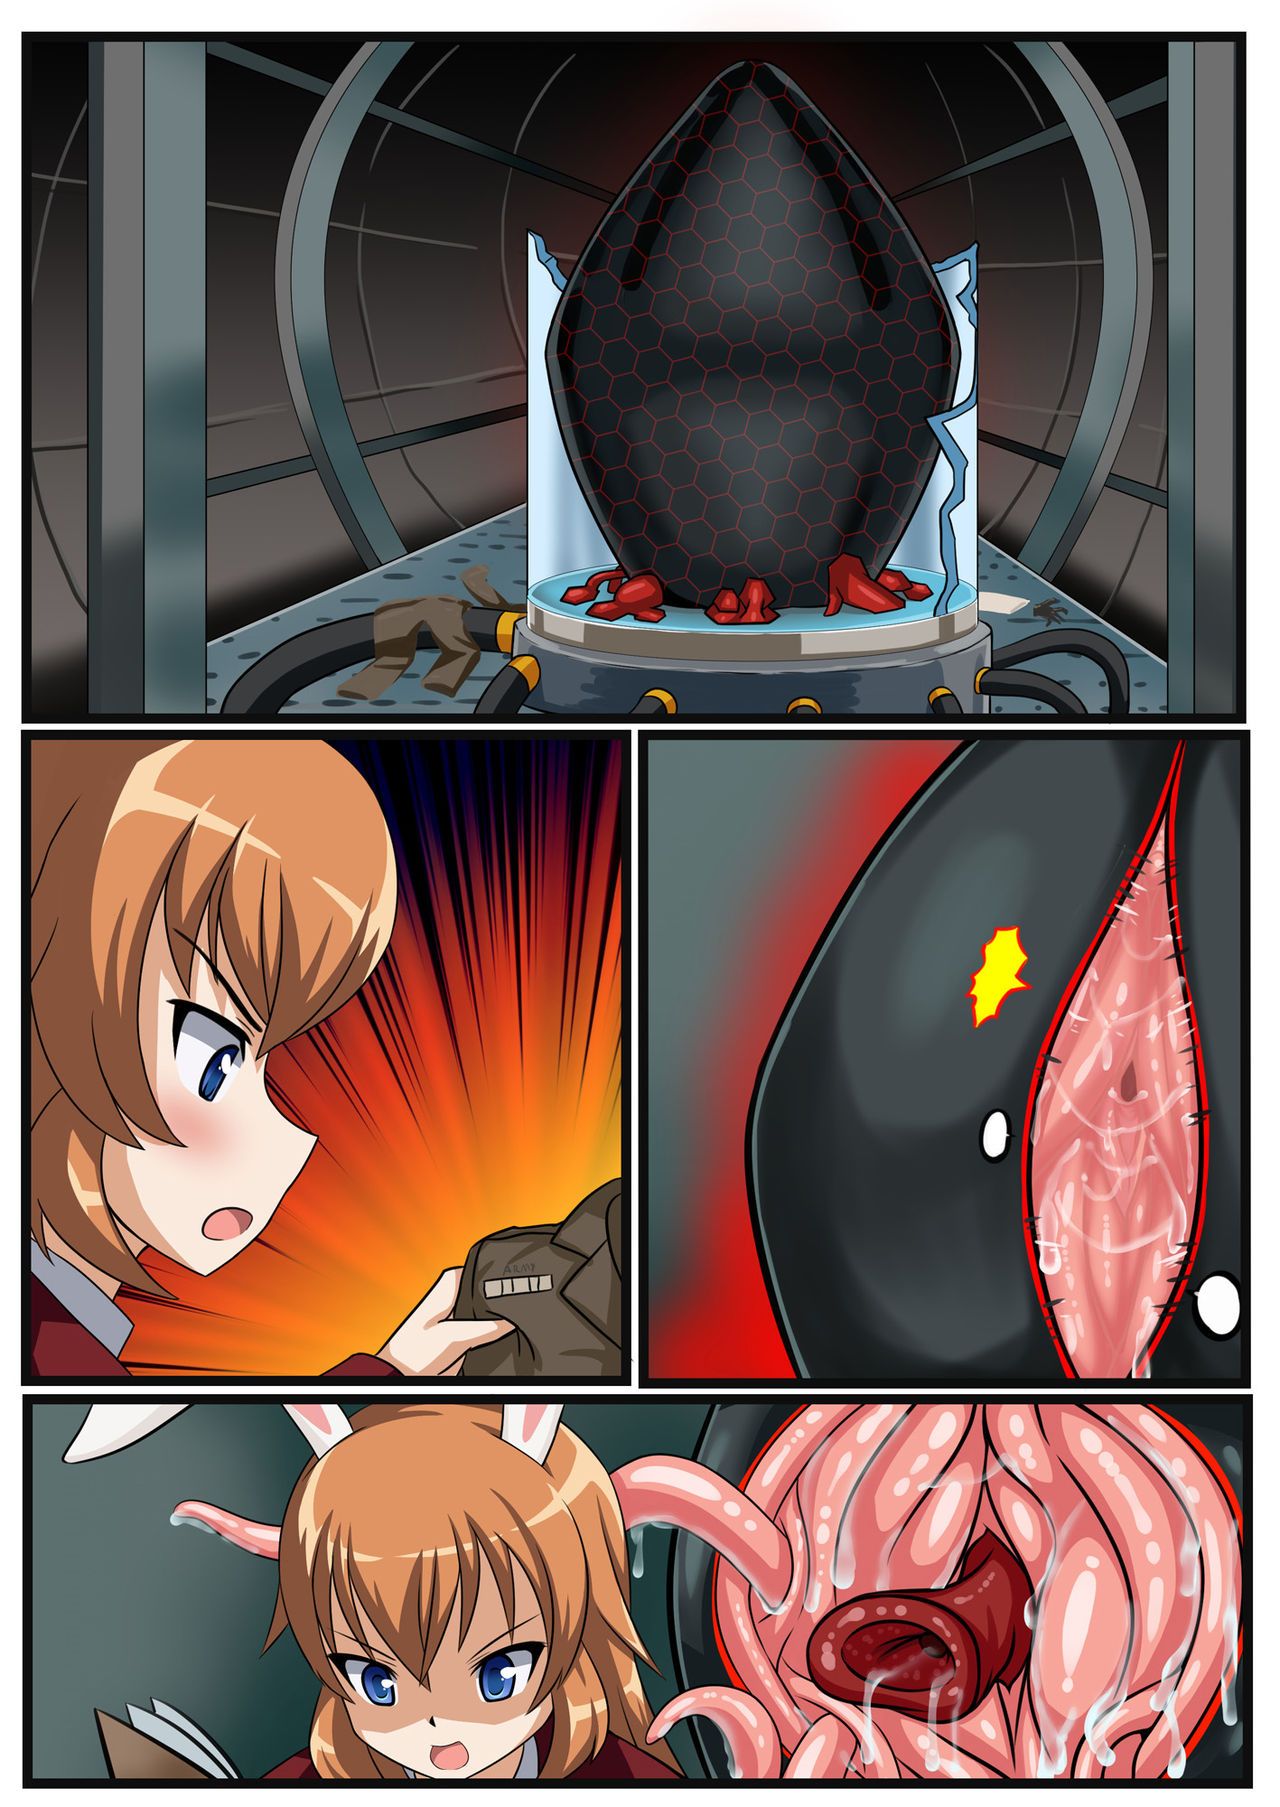 [Red Axis] Install Vore On Witches (Strike Witches) 4